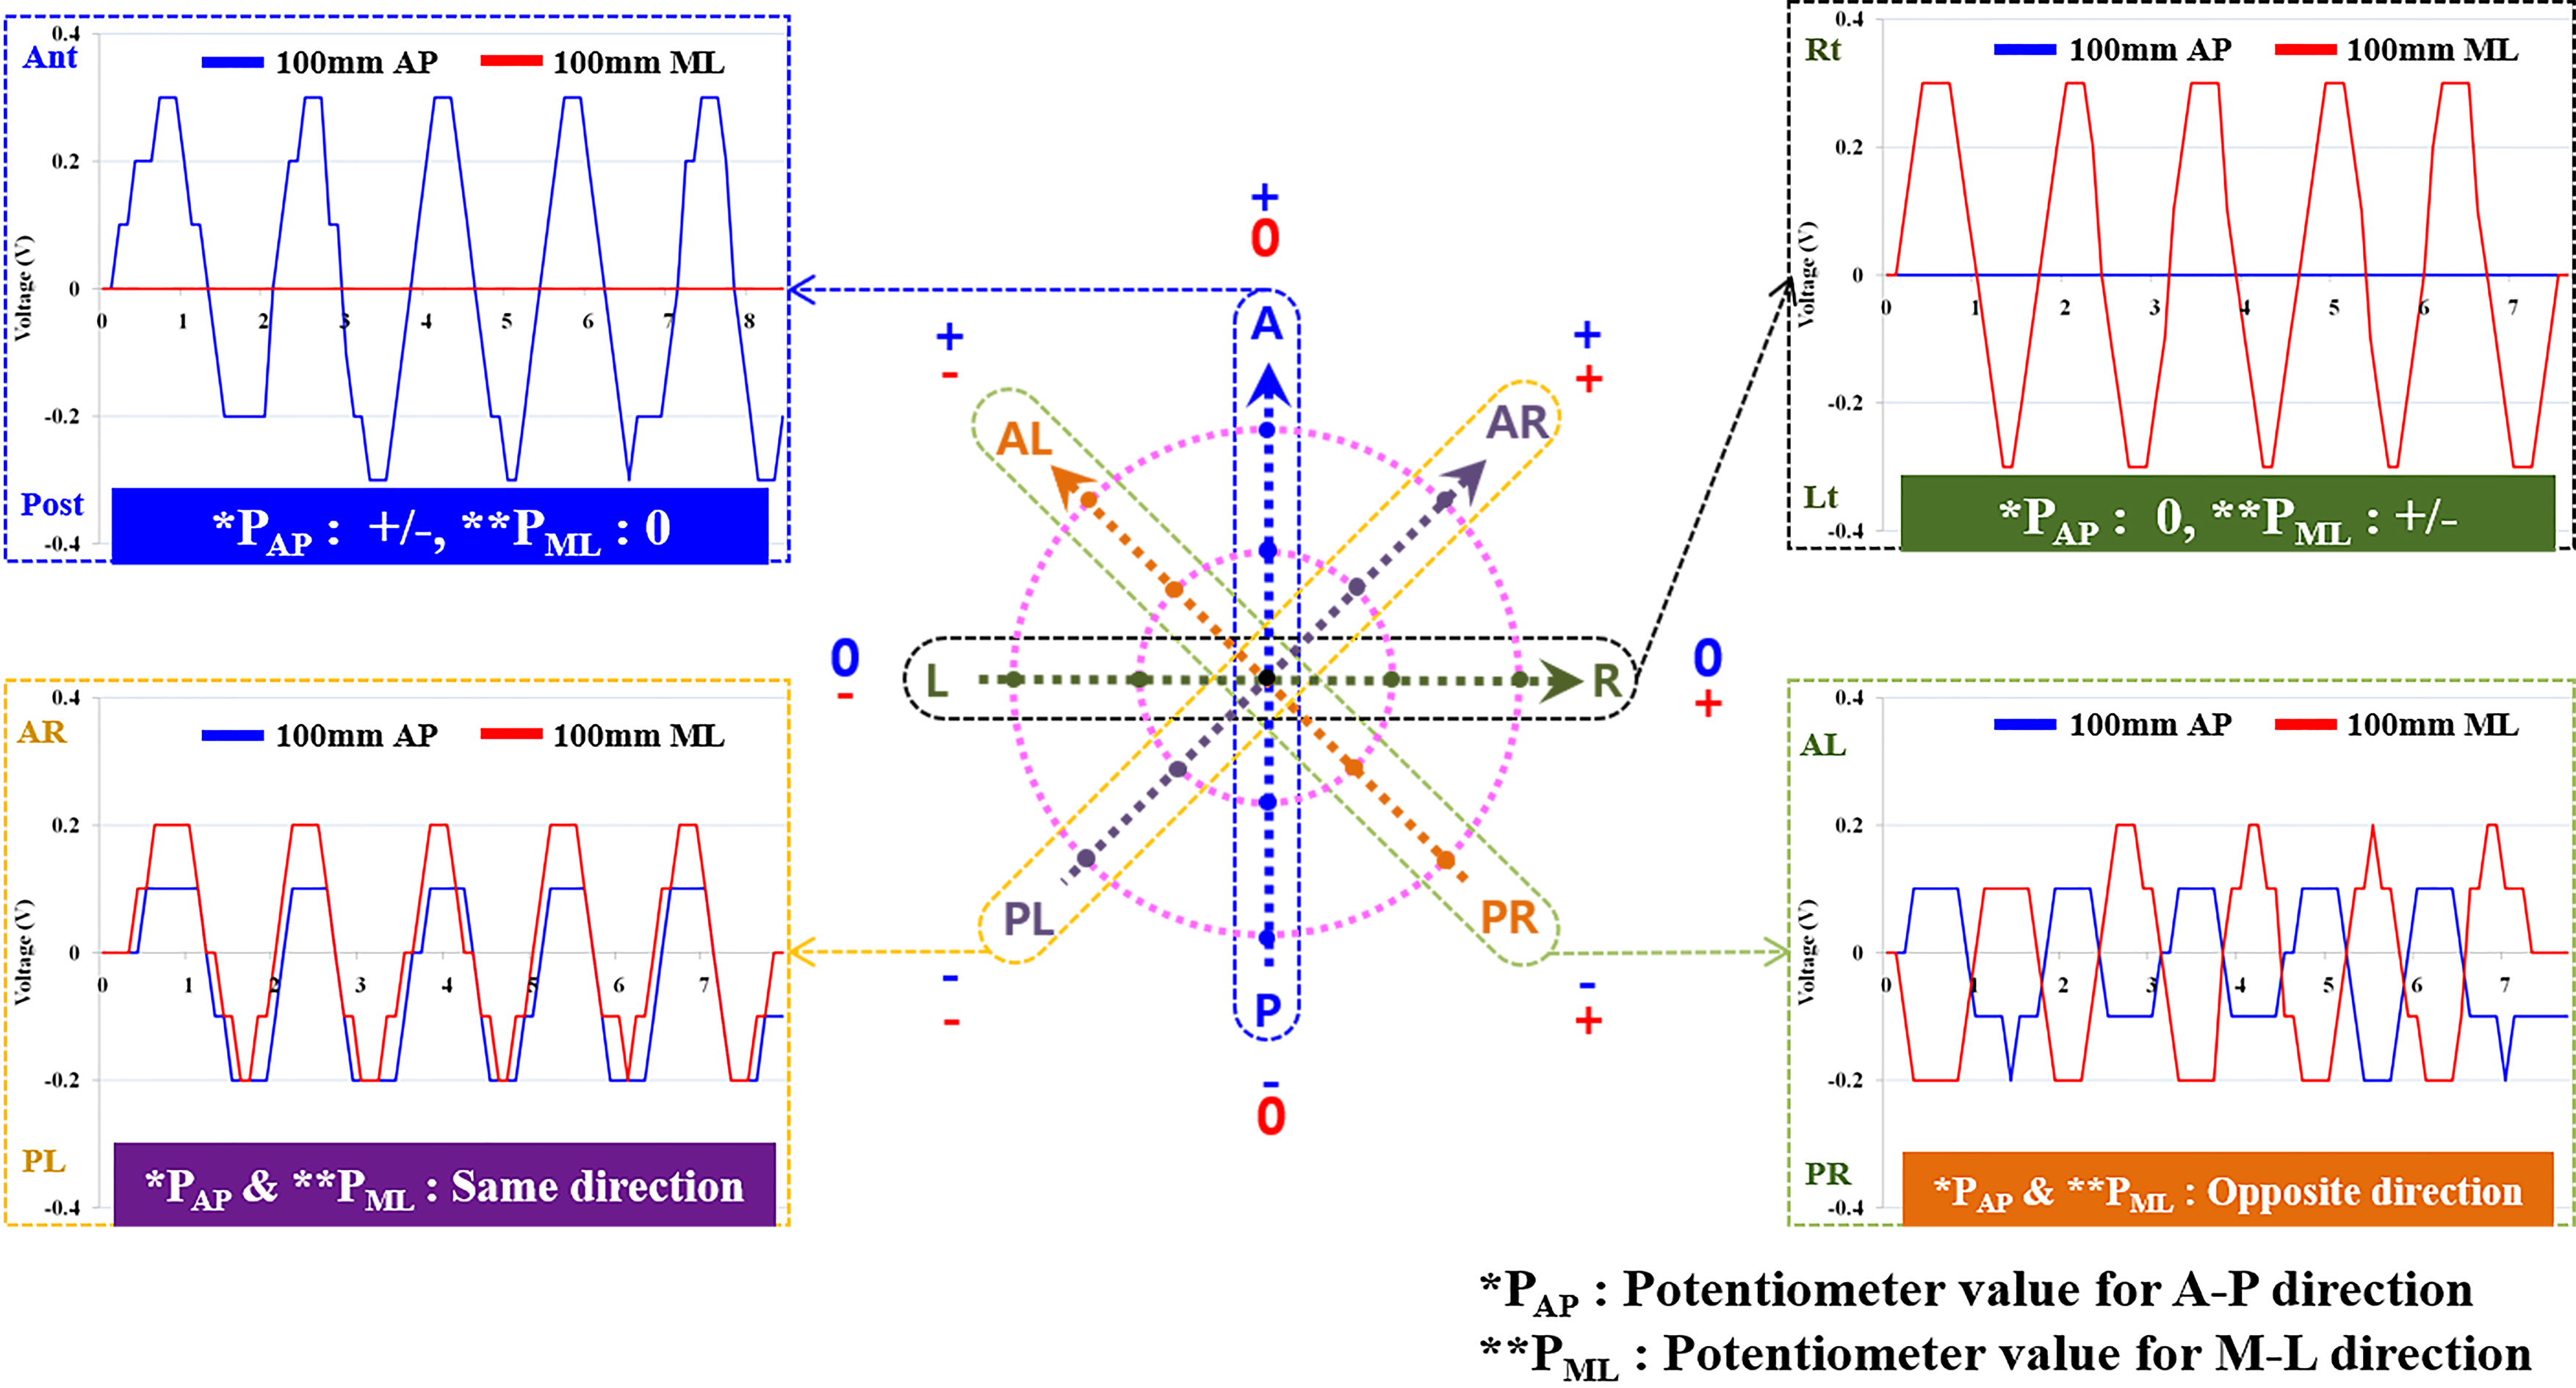 Results of two potentiometers according to eight directions.